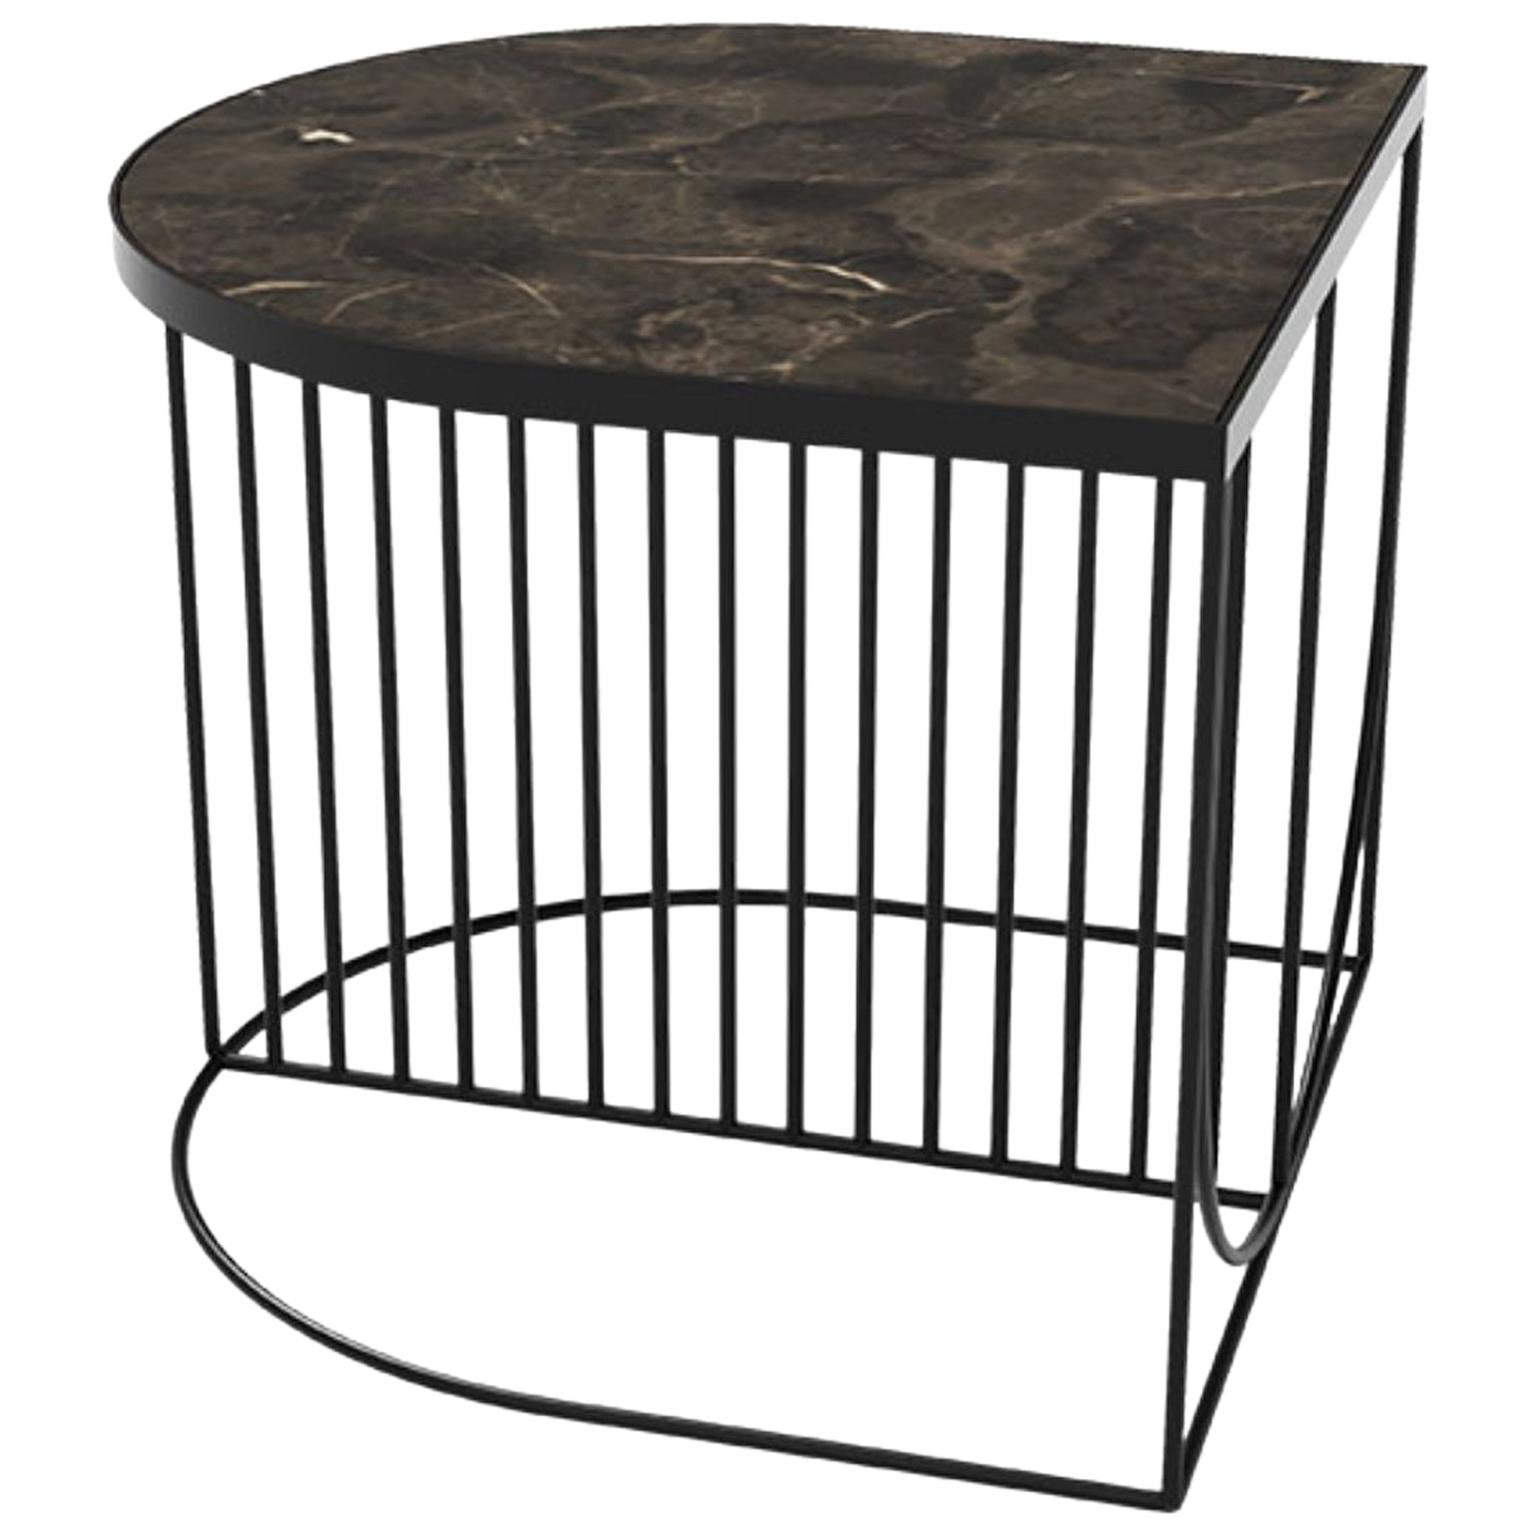 Brown Marble and Black Steel Contemporary Side Table